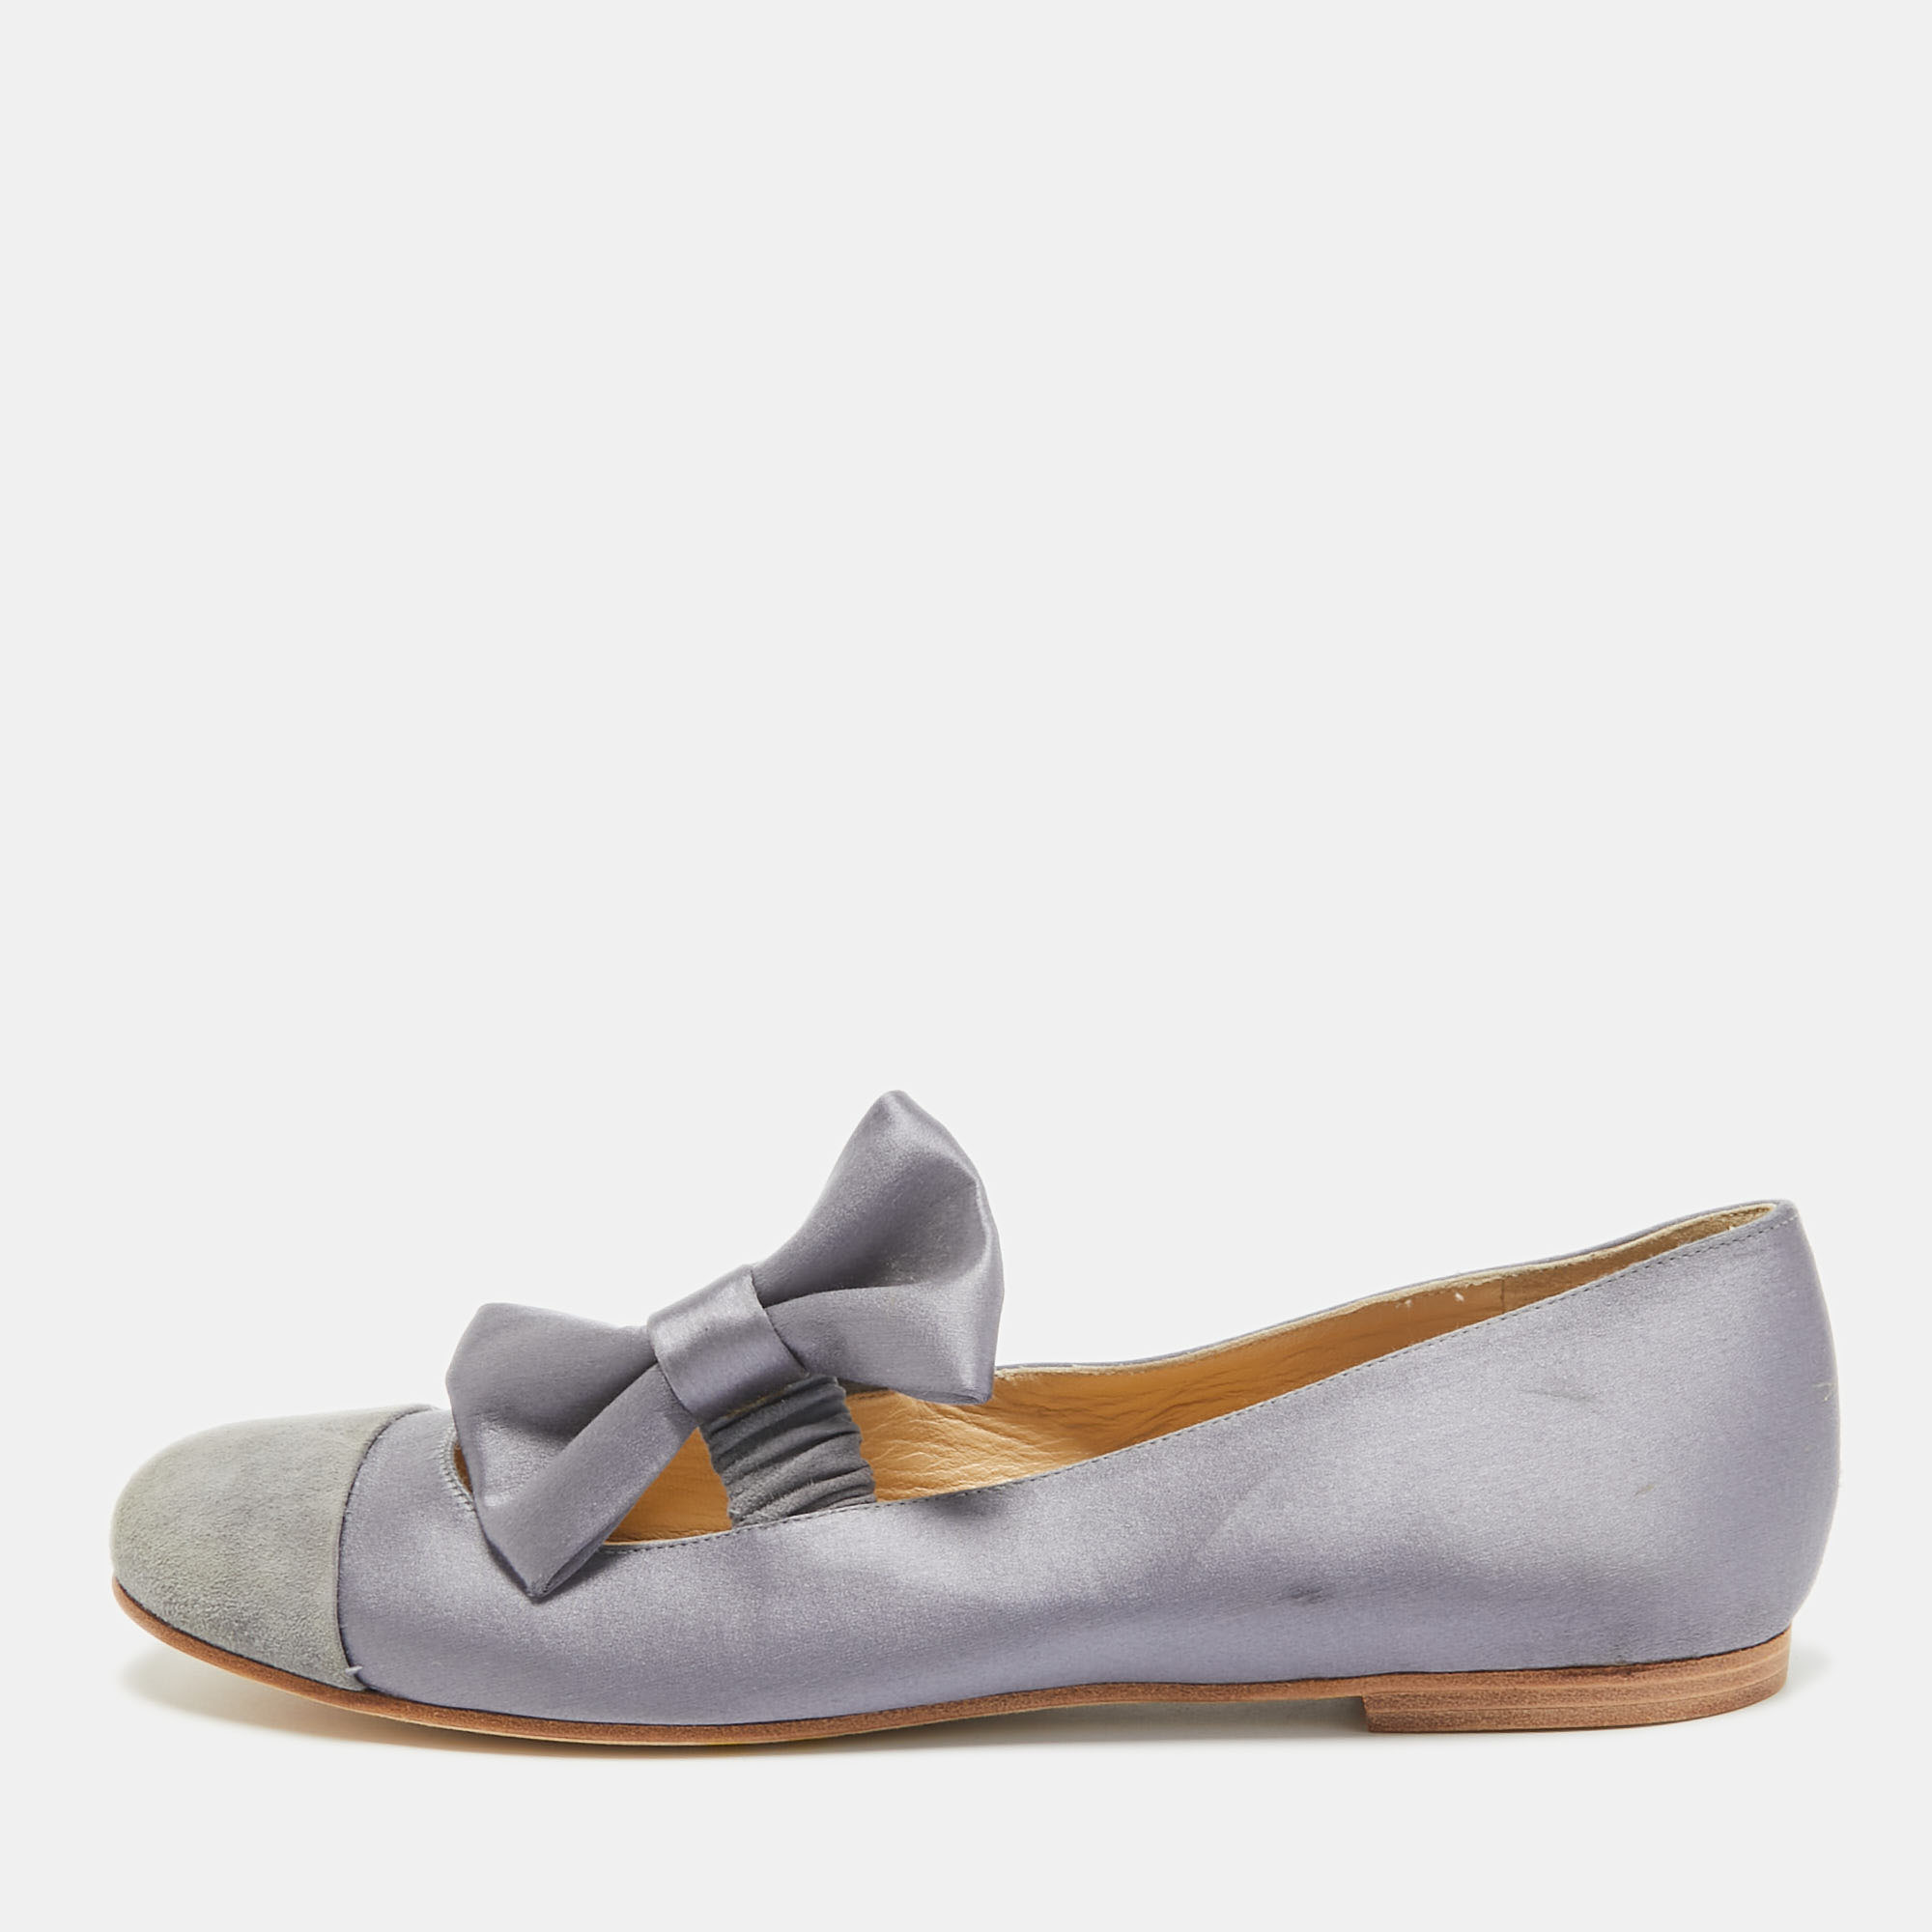 See by chloe grey suede and satin bow mary jane ballet flats size 37